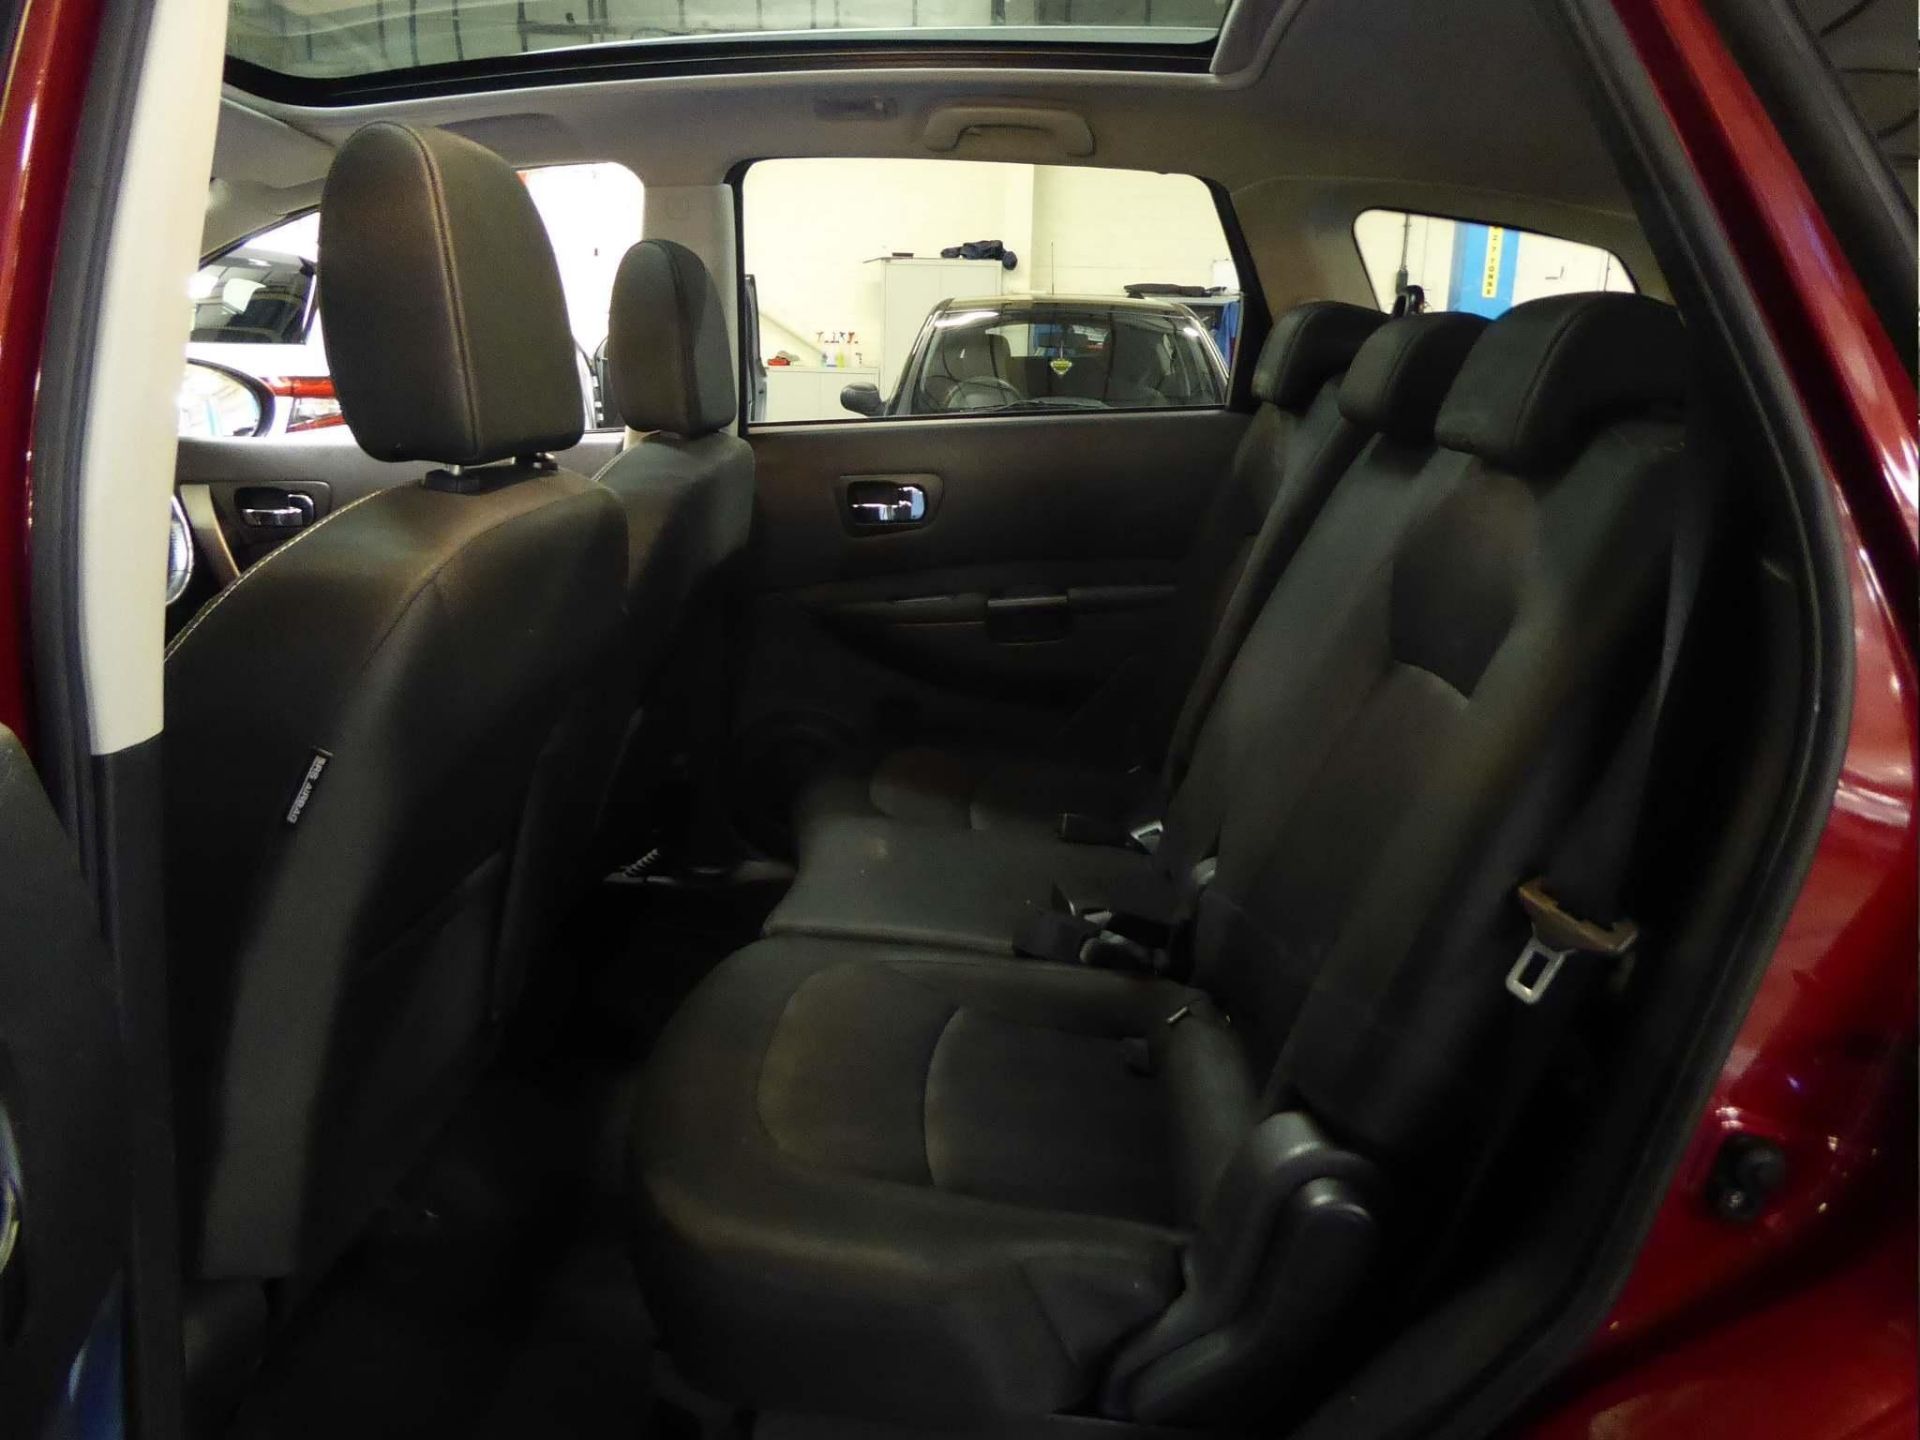 2012 Nissan Qashqai +2 N - Tech+Dci 5Dr 7-Seater SUV - CL505 - NO VAT ON THE HAMMER - - Image 24 of 24